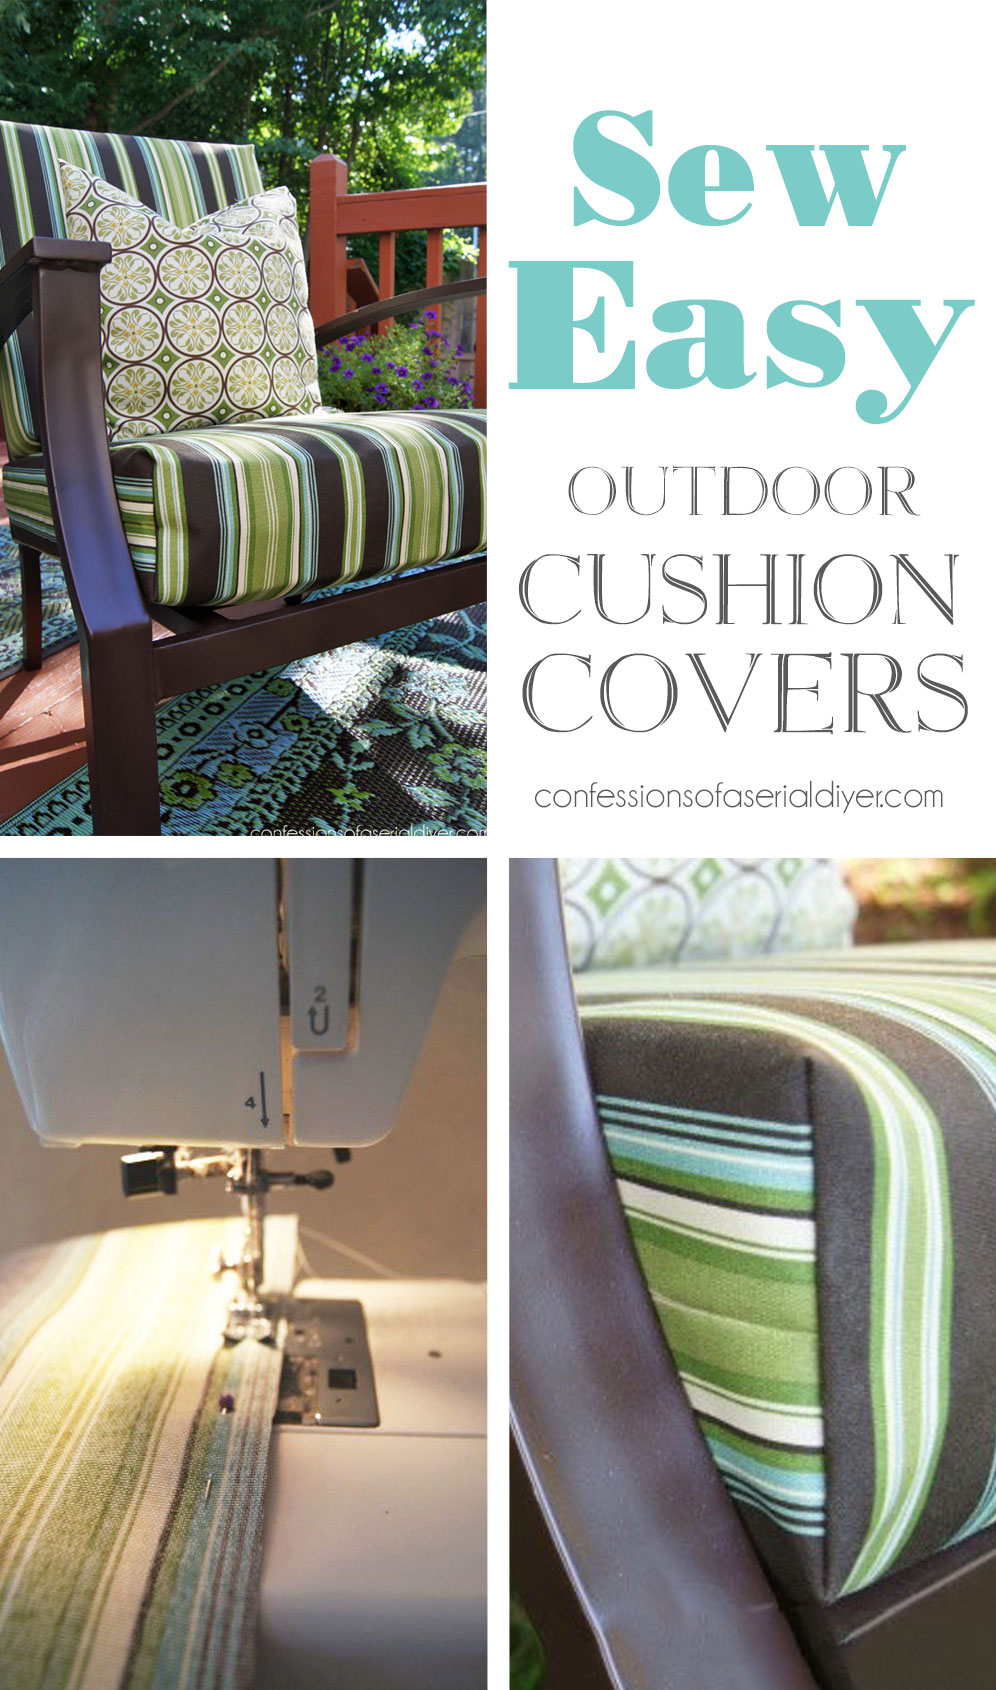 Sew Easy Outdoor Cushion Covers, How To Get Mold Off Of Outdoor Cushion Covers